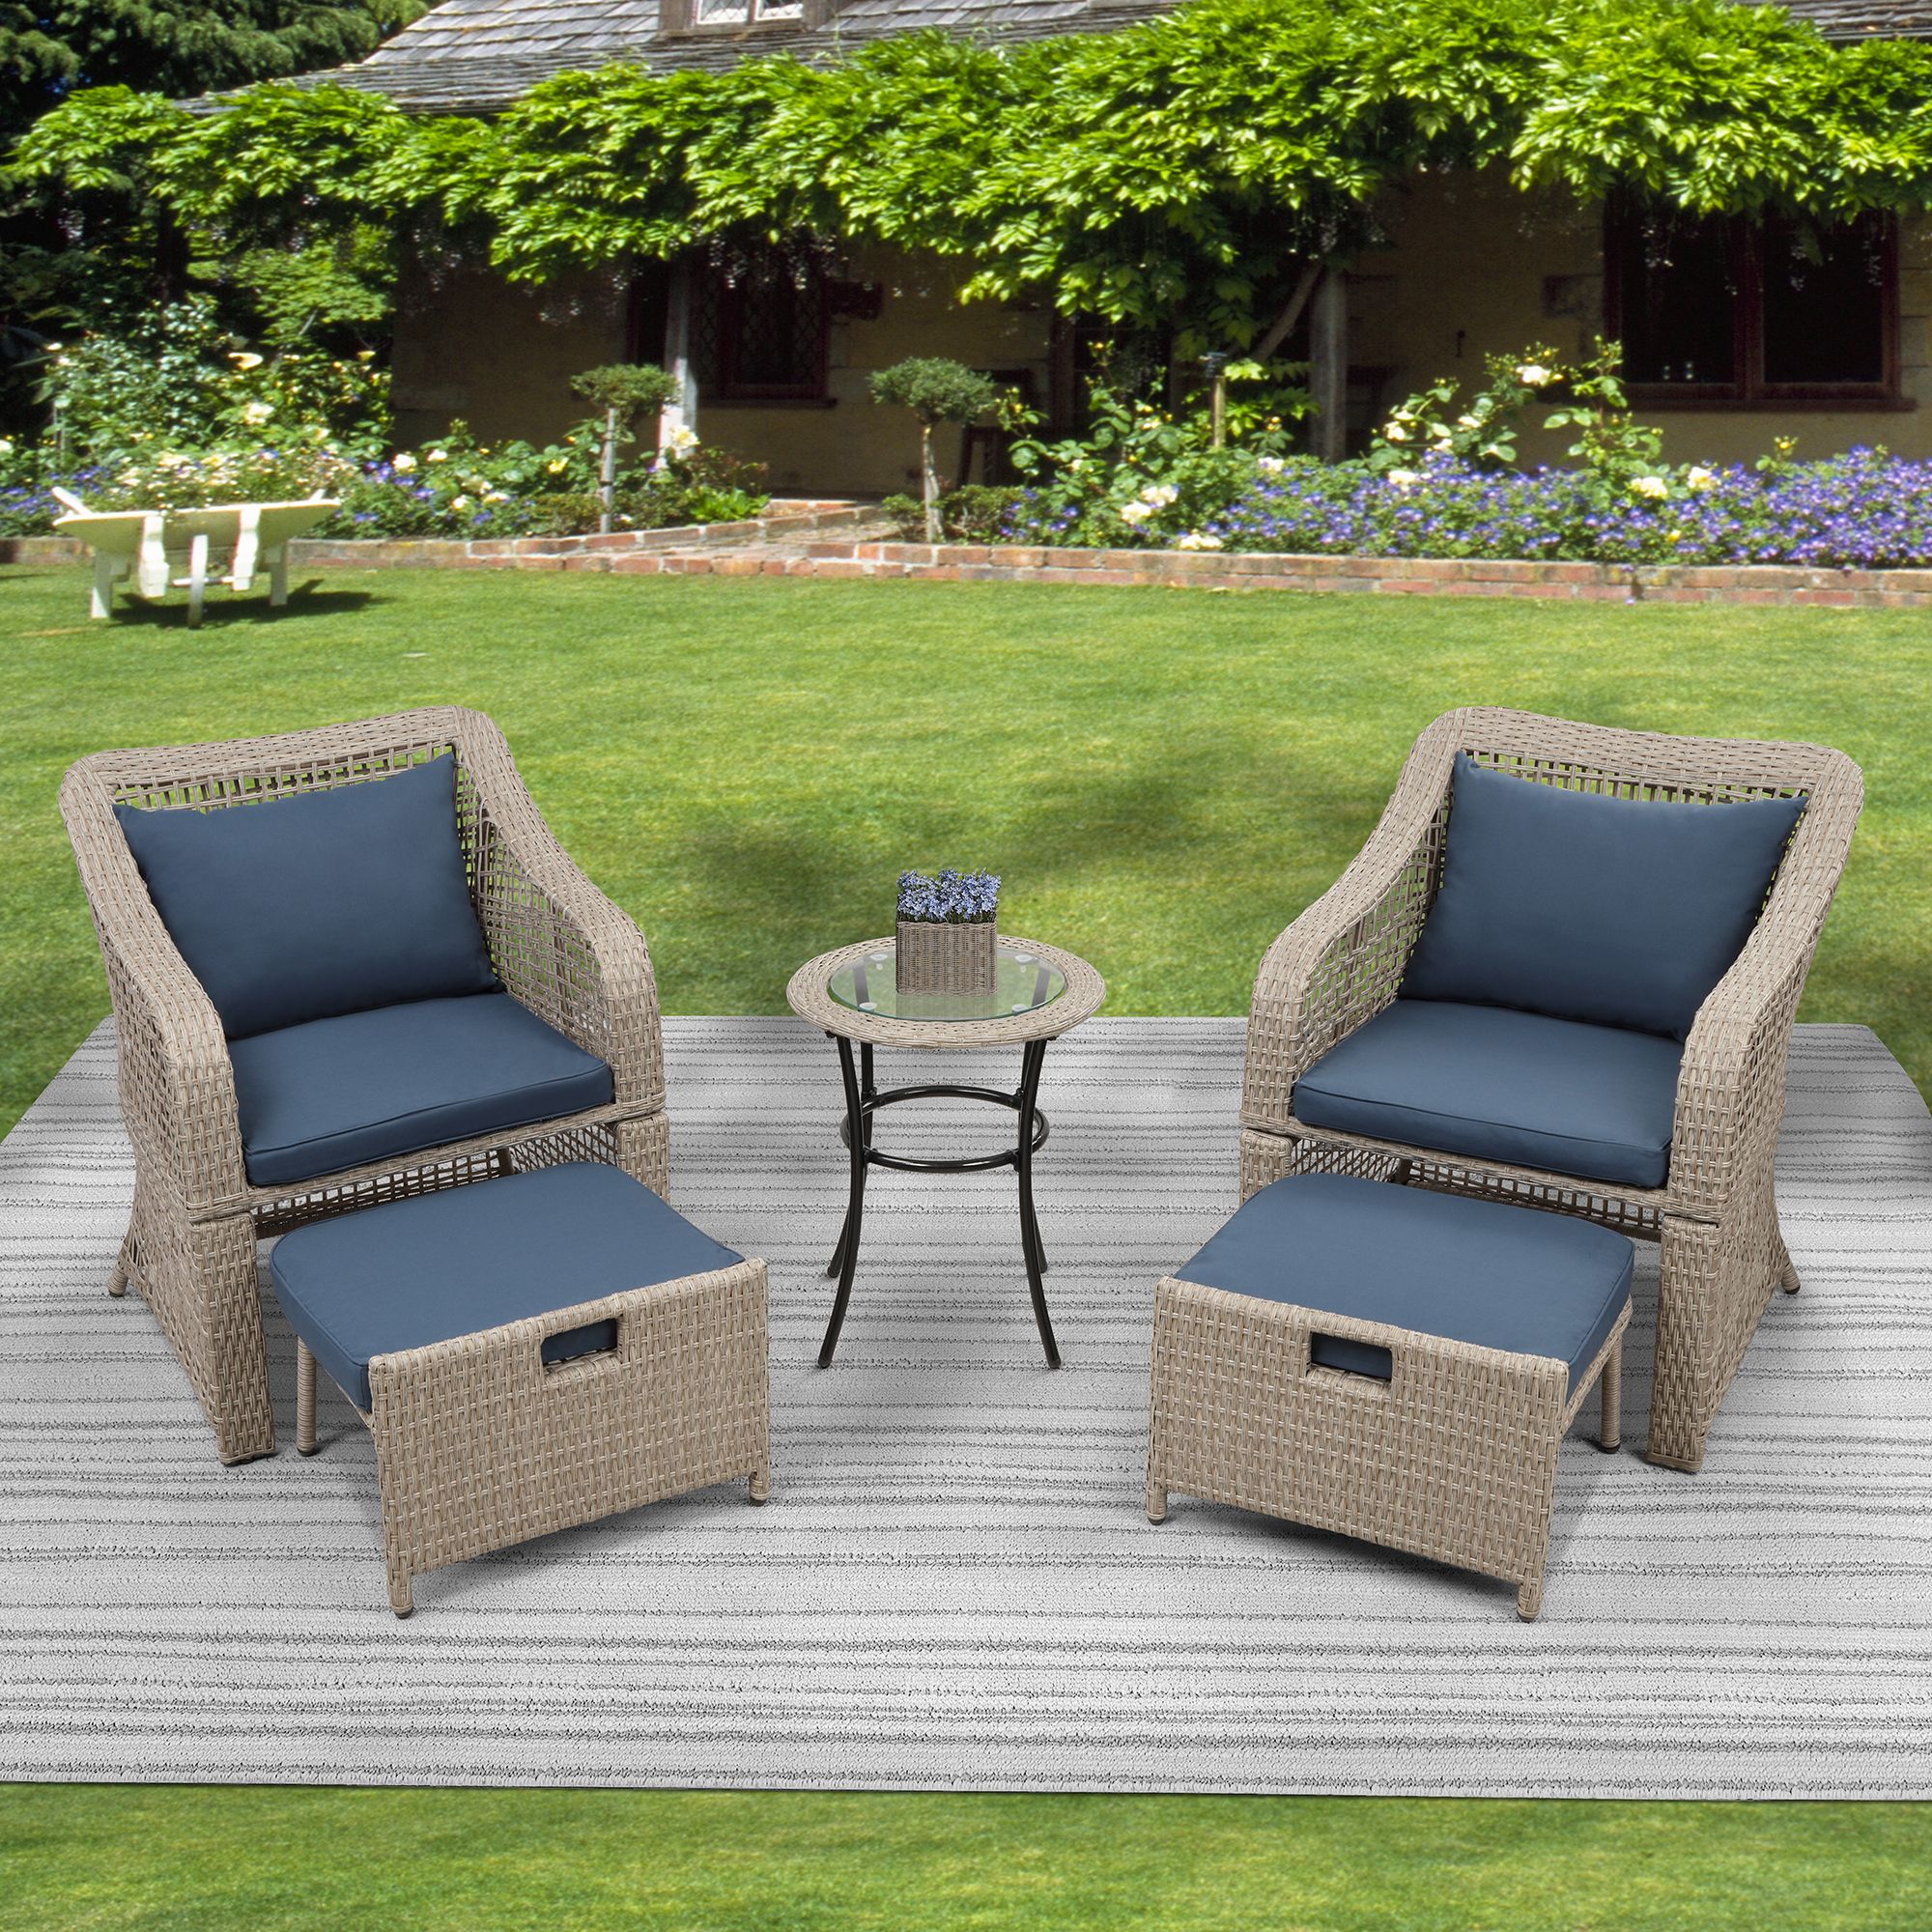 Outdoor Patio Furniture Sets, 5 Piece Wicker Patio Bar Set, 2Pcs Arm Inside Natural Woven Outdoor Chairs Sets (View 5 of 15)